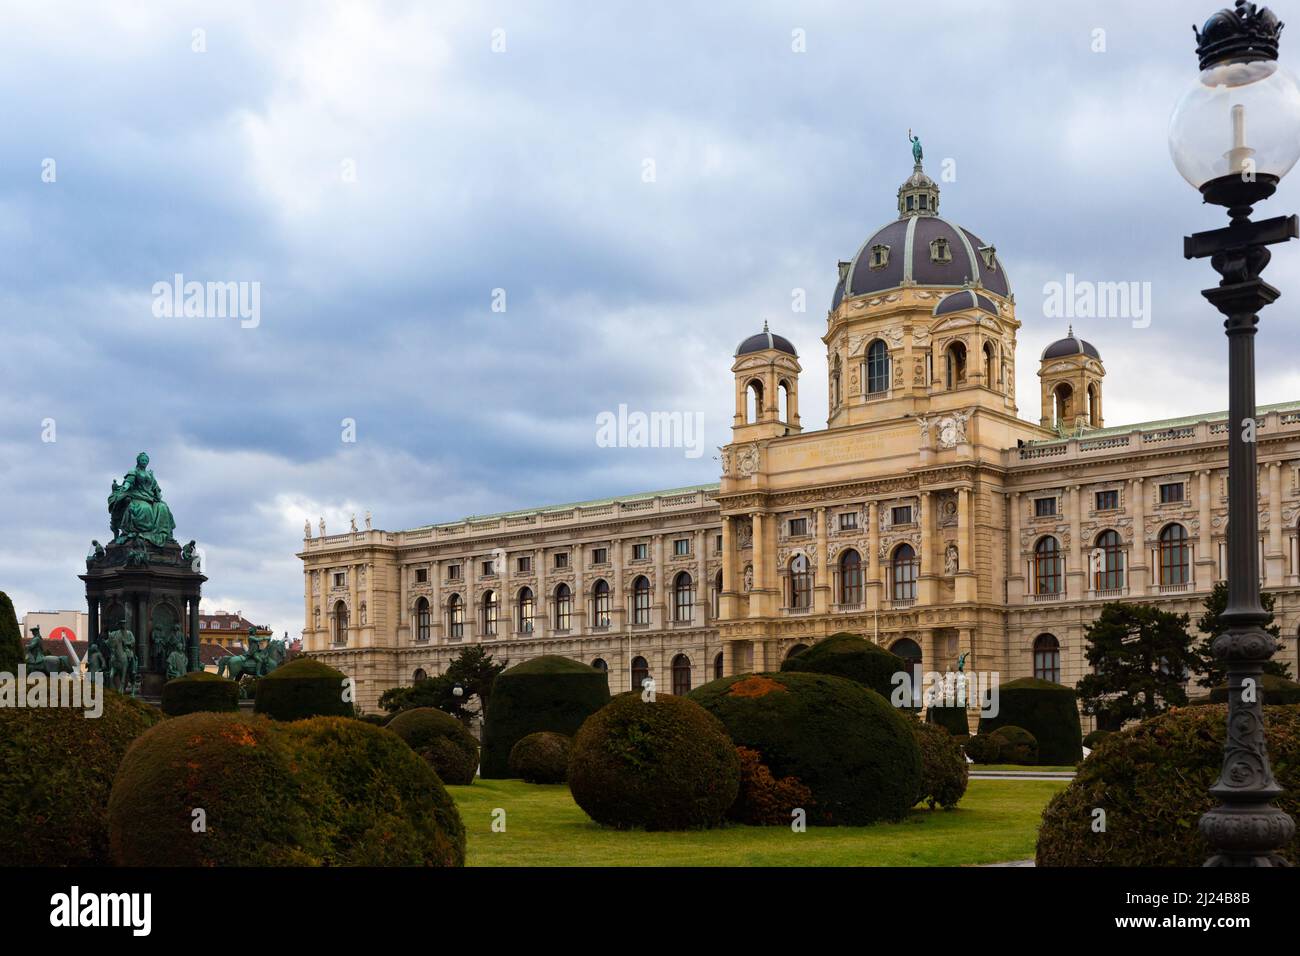 External view of Natural History Museum in Veienne, Austria Stock Photo